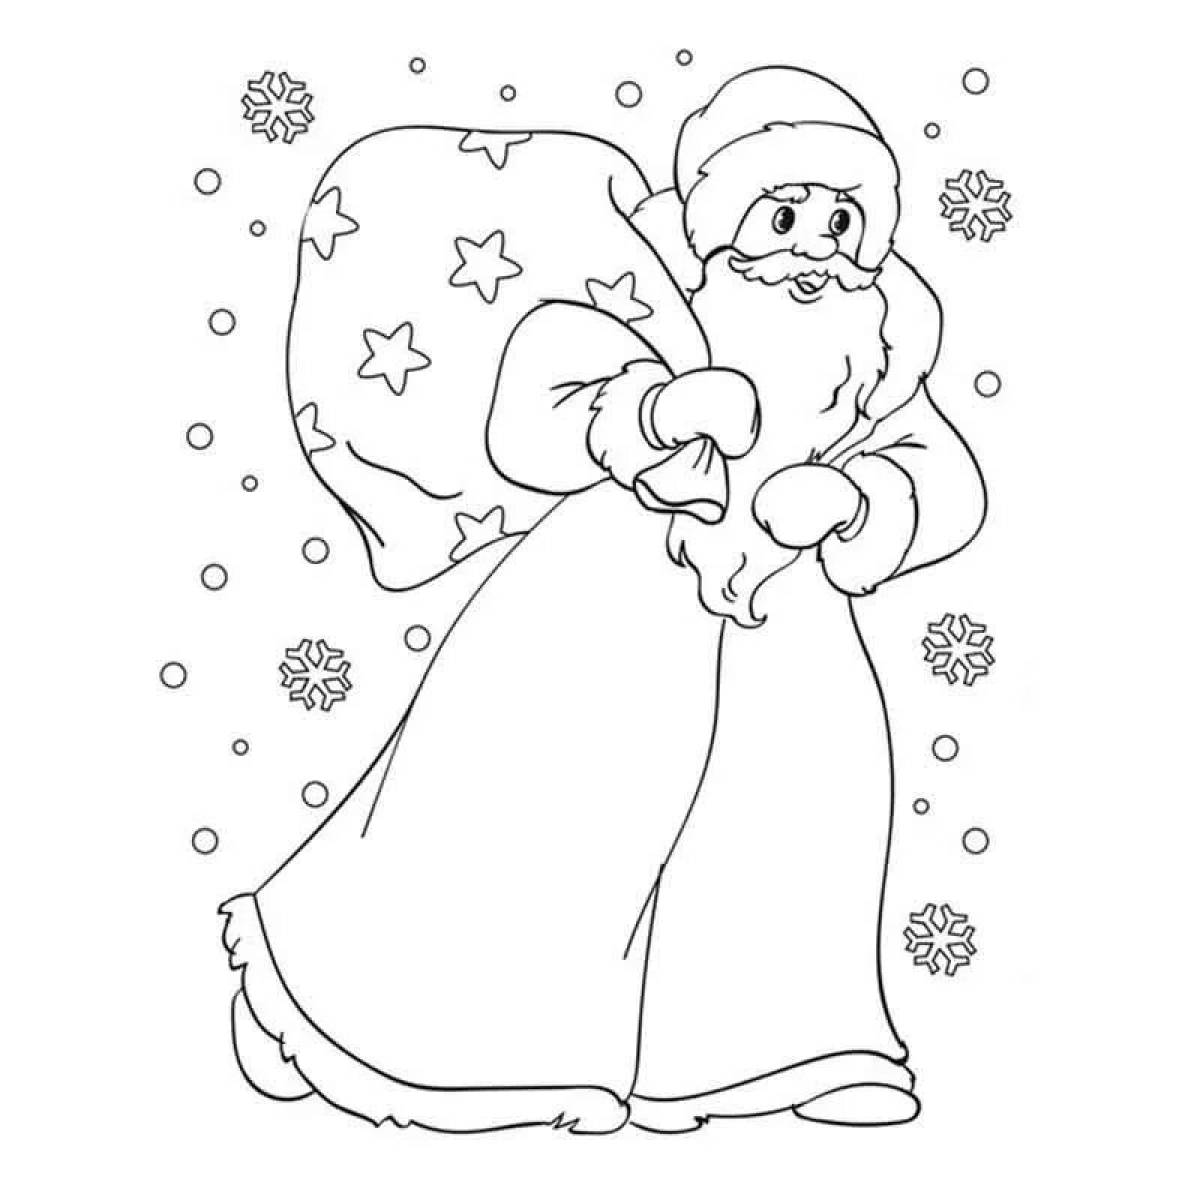 Bright coloring Santa Claus and Snow Maiden